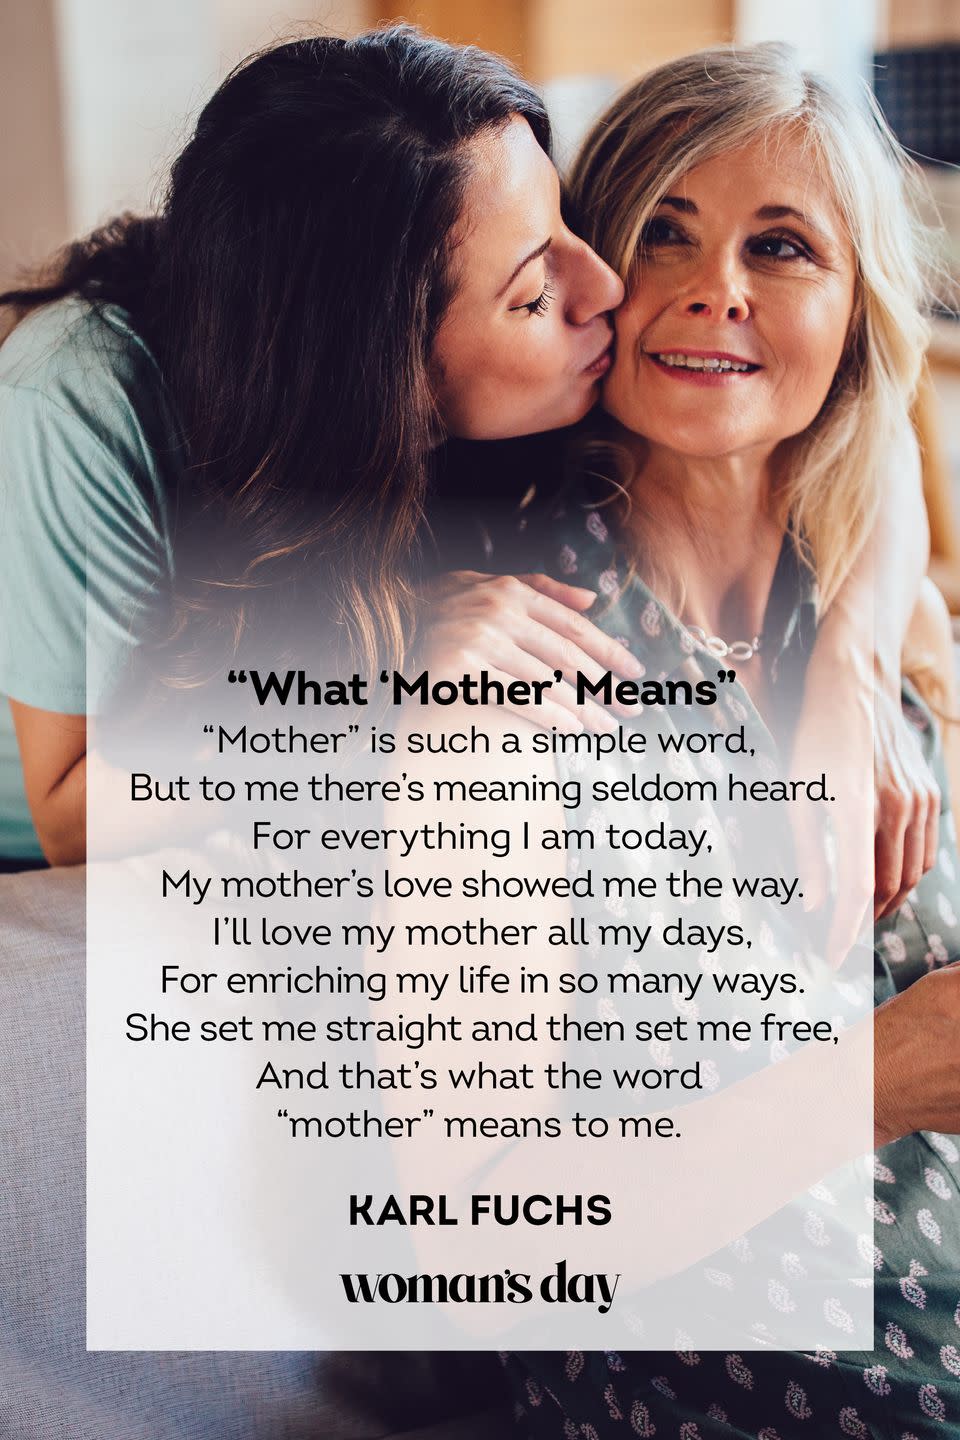 <p>"Mother" is such a simple word,<br>But to me there’s meaning seldom heard.<br>For everything I am today,<br>My mother’s love showed me the way.<br>I’ll love my mother all my days,<br>For enriching my life in so many ways.<br>She set me straight and then set me free,<br>And that’s what the word "mother" means to me.</p><p>— Karl Fuchs</p>